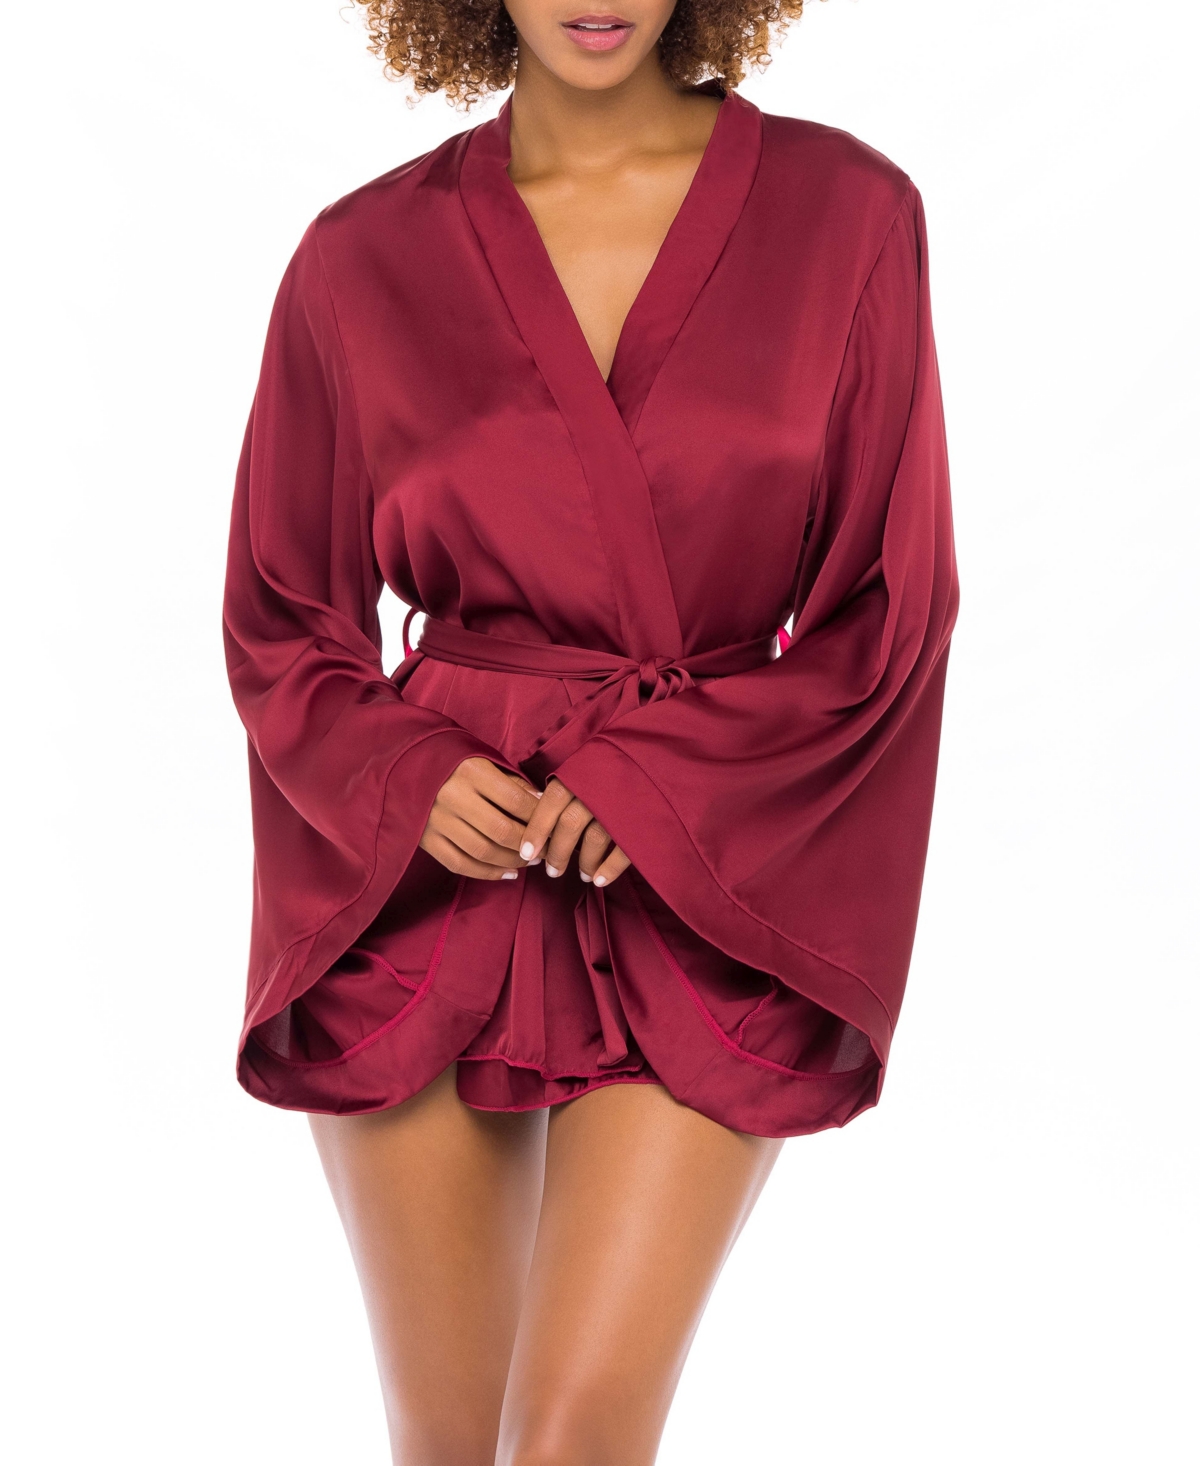 Women's Short Polyester Charmeuse Lingerie Robe with Wide Sleeves and A Tie Belt - Rhubarb